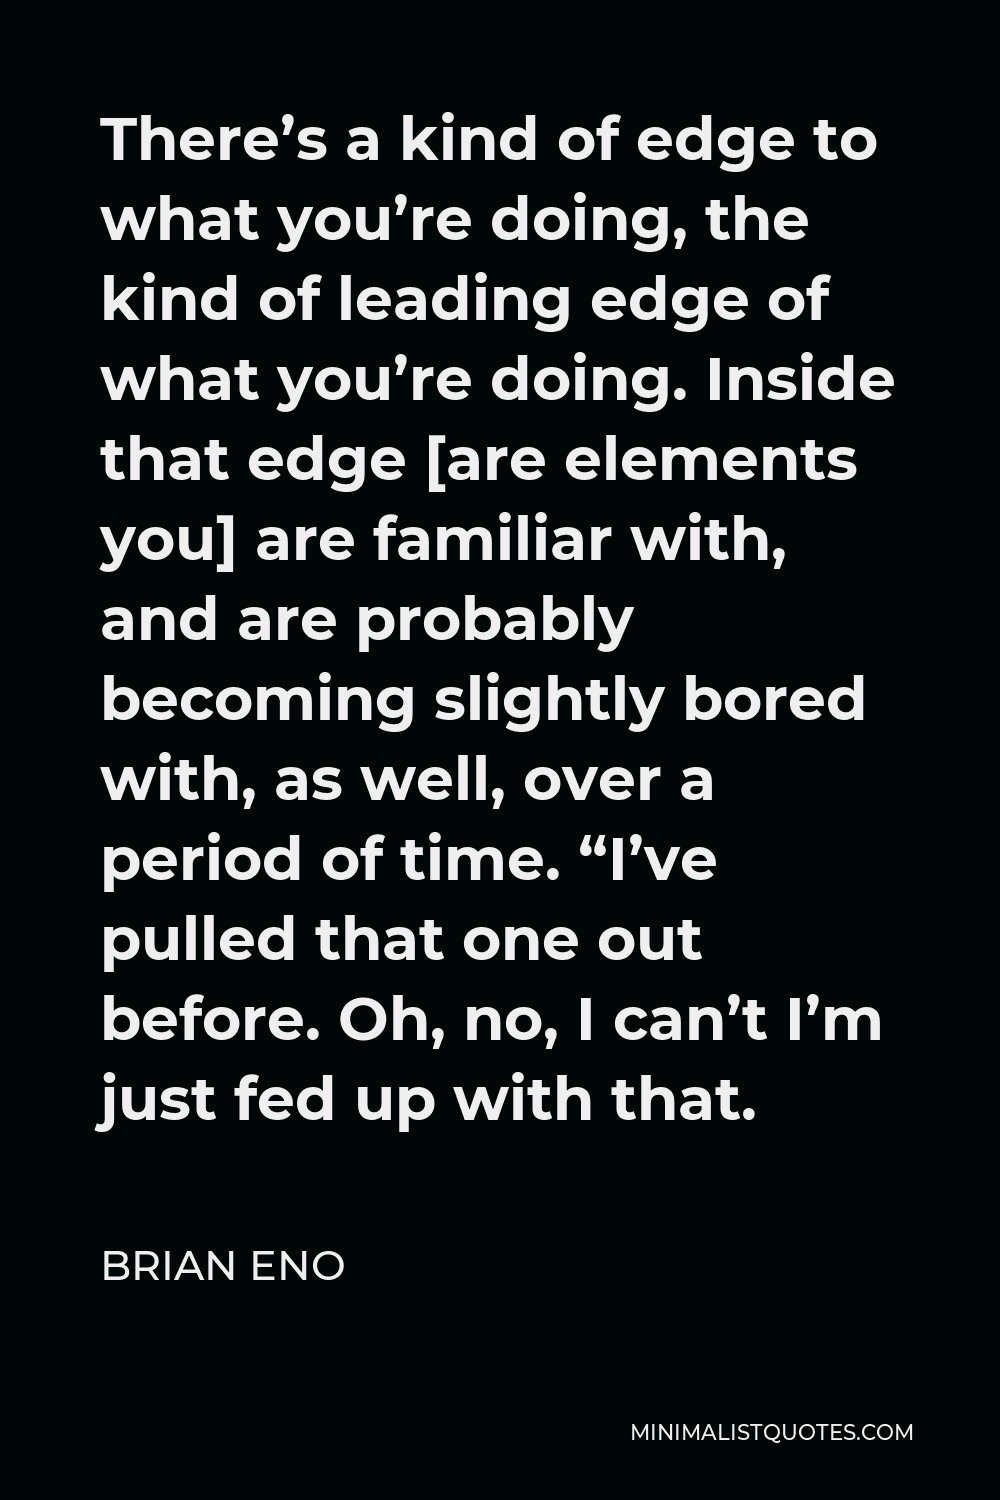 Brian Eno Quote - There’s a kind of edge to what you’re doing, the kind of leading edge of what you’re doing. Inside that edge [are elements you] are familiar with, and are probably becoming slightly bored with, as well, over a period of time. “I’ve pulled that one out before. Oh, no, I can’t I’m just fed up with that.